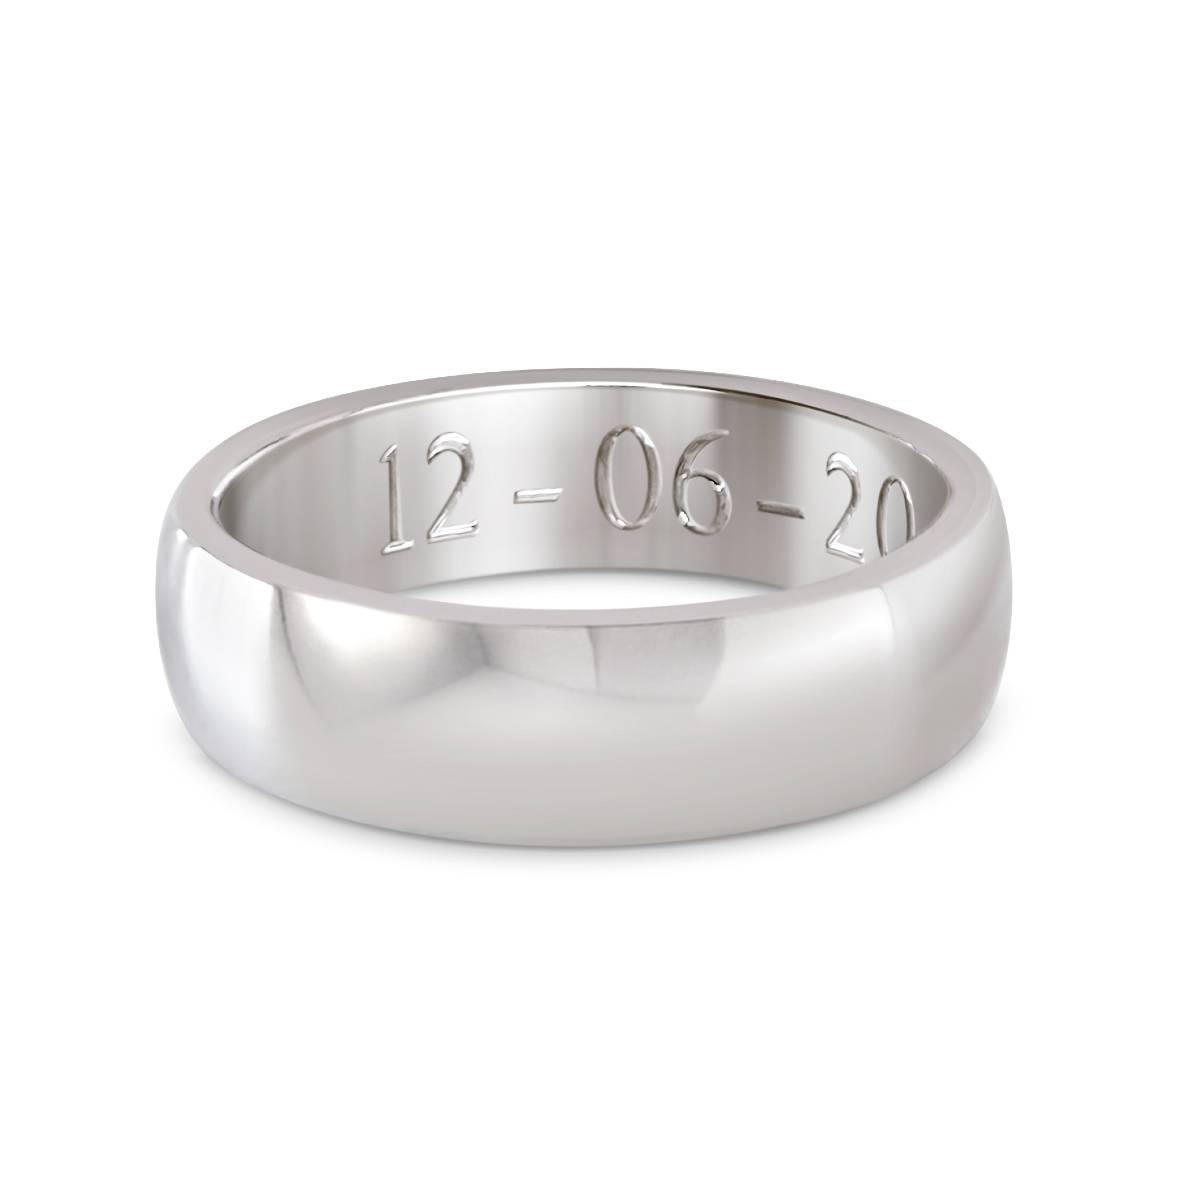 silver ring mens stainless steel us 11 wedding band engravable solid 